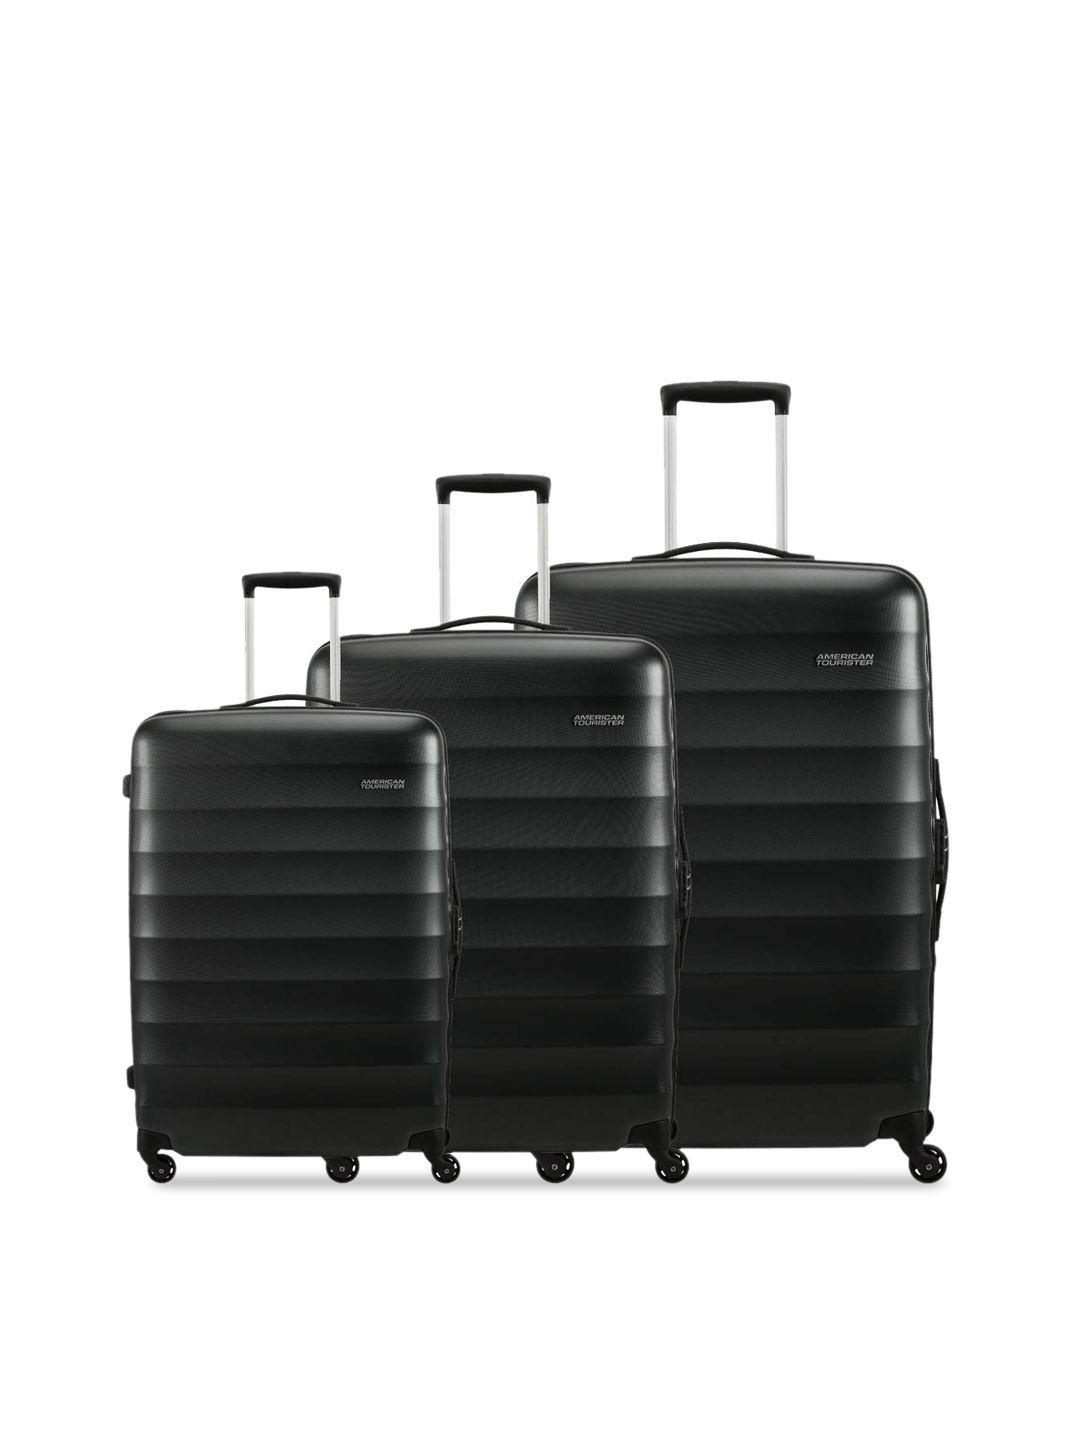 american tourister set of 3 black solid hard-sided trolley suitcases